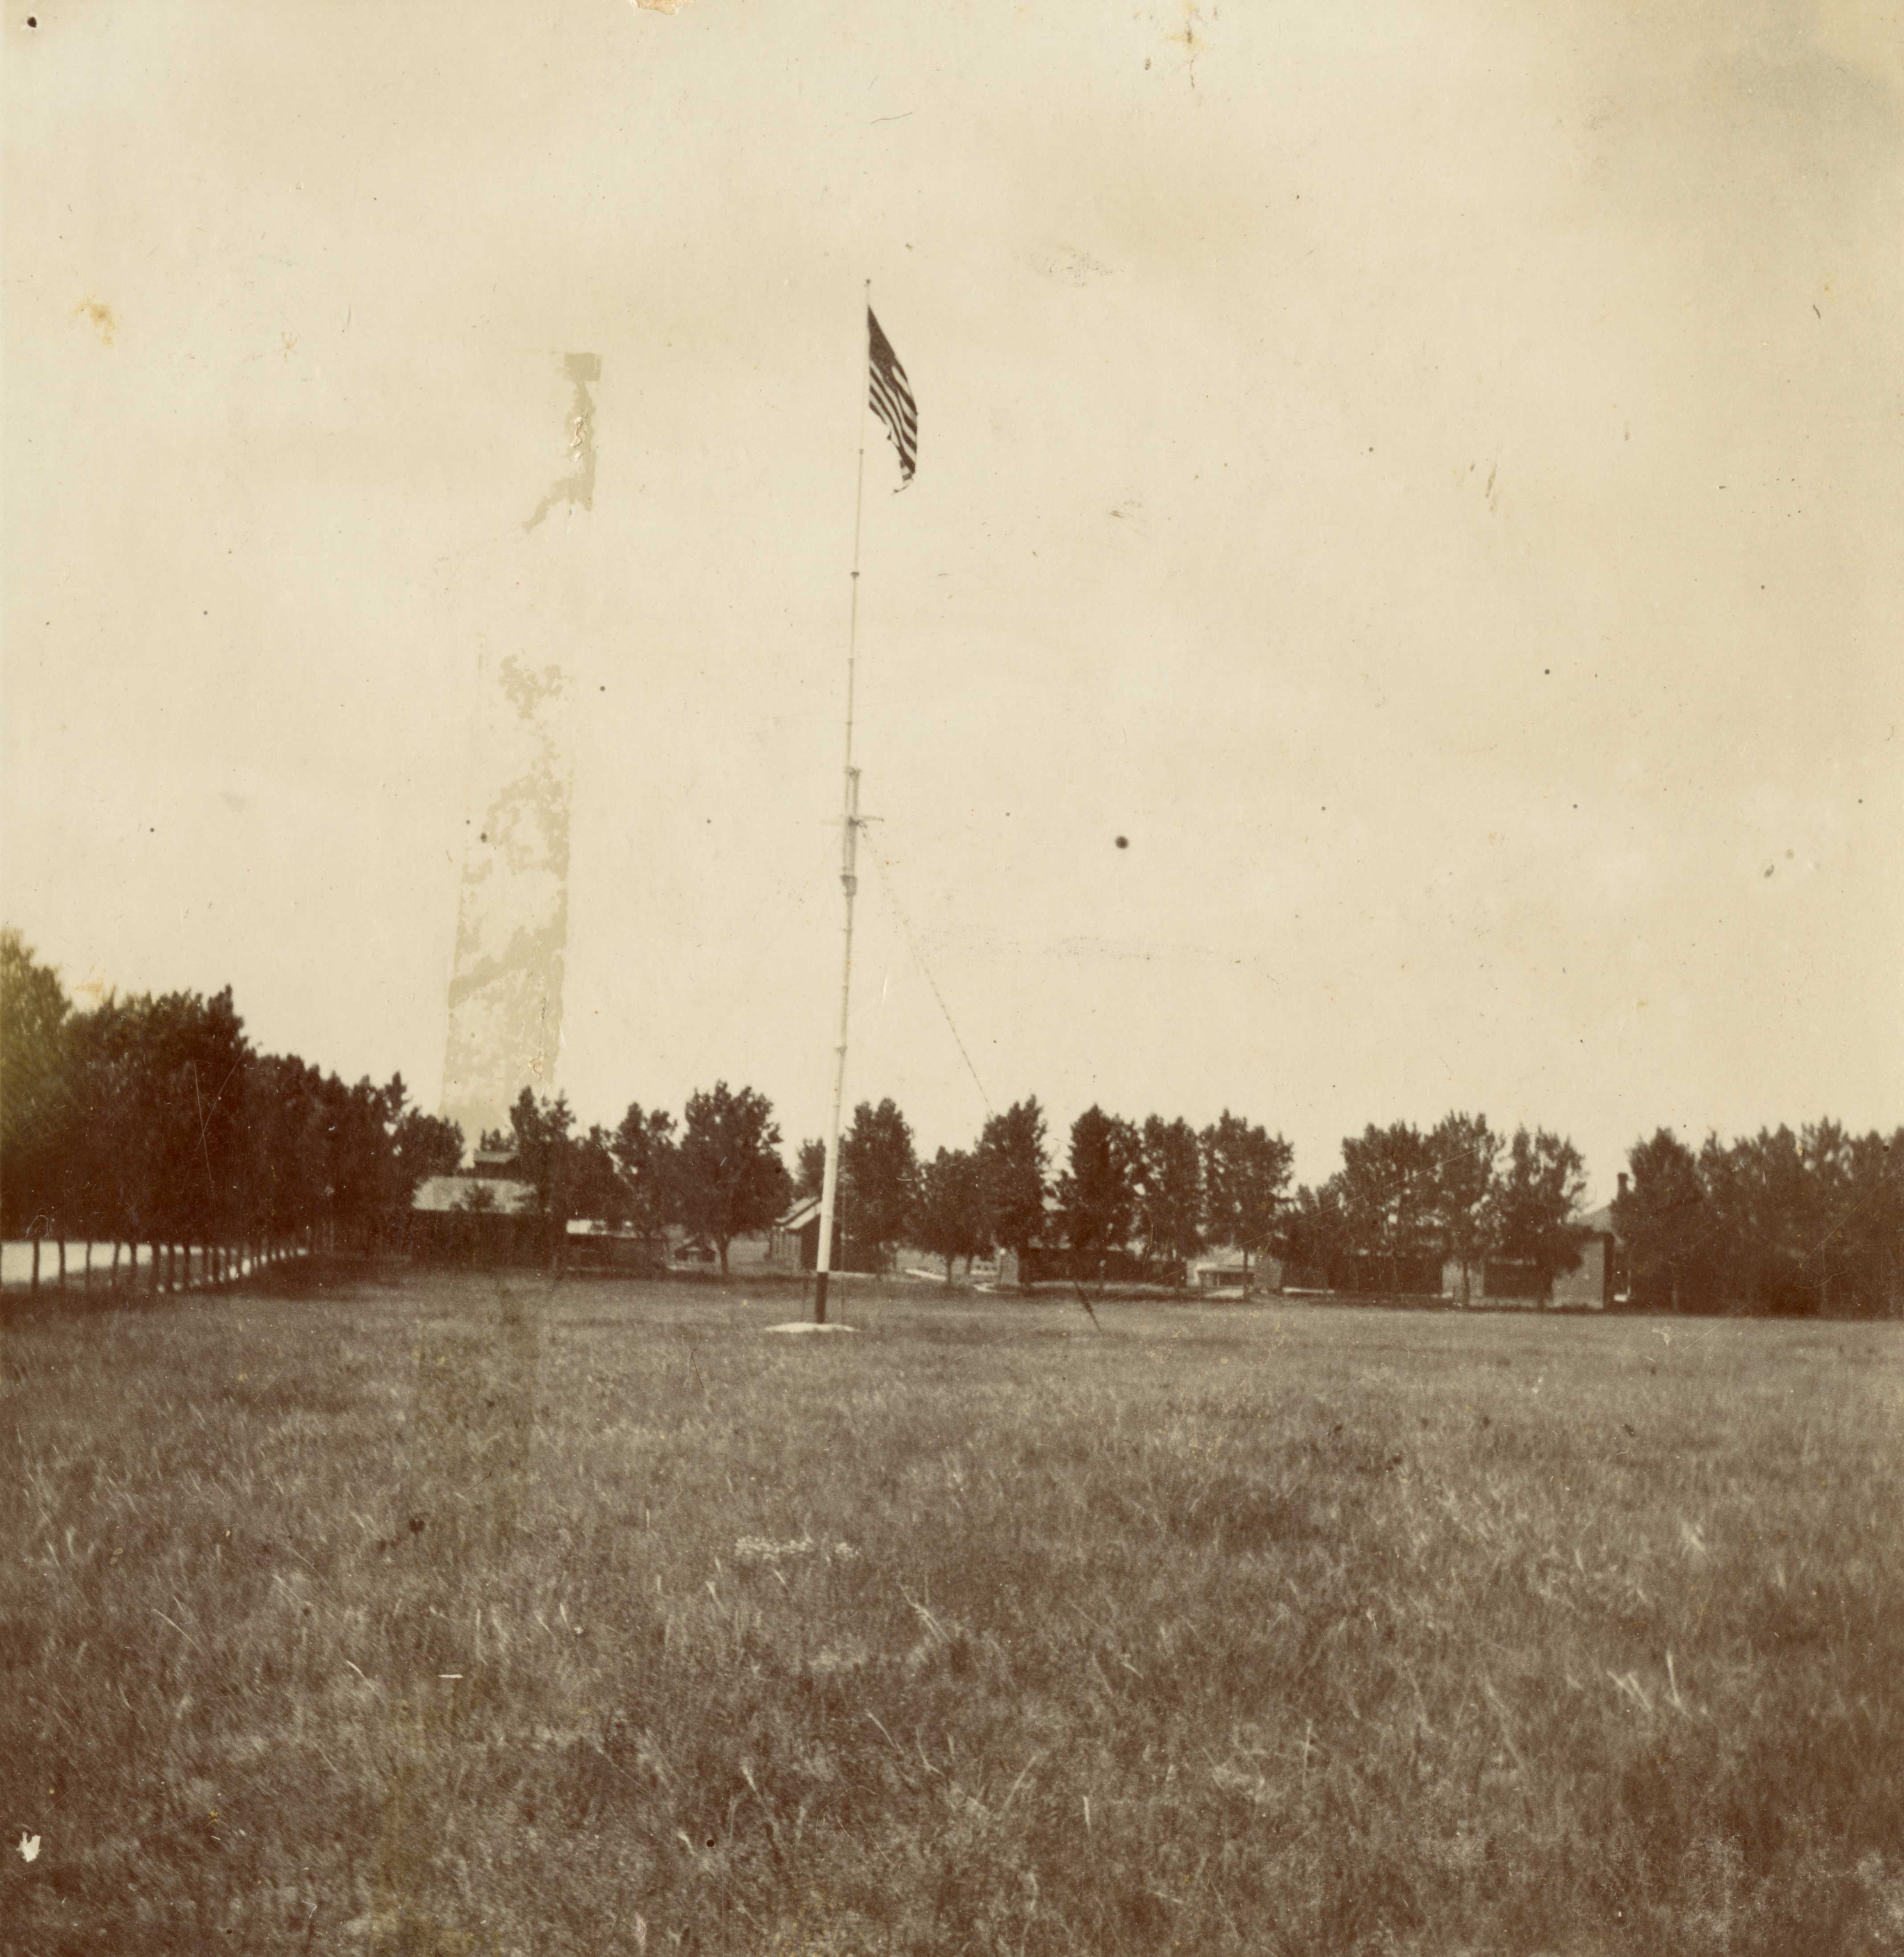 [Flagpole and parade grounds at Fort Robinson, Nebraska]